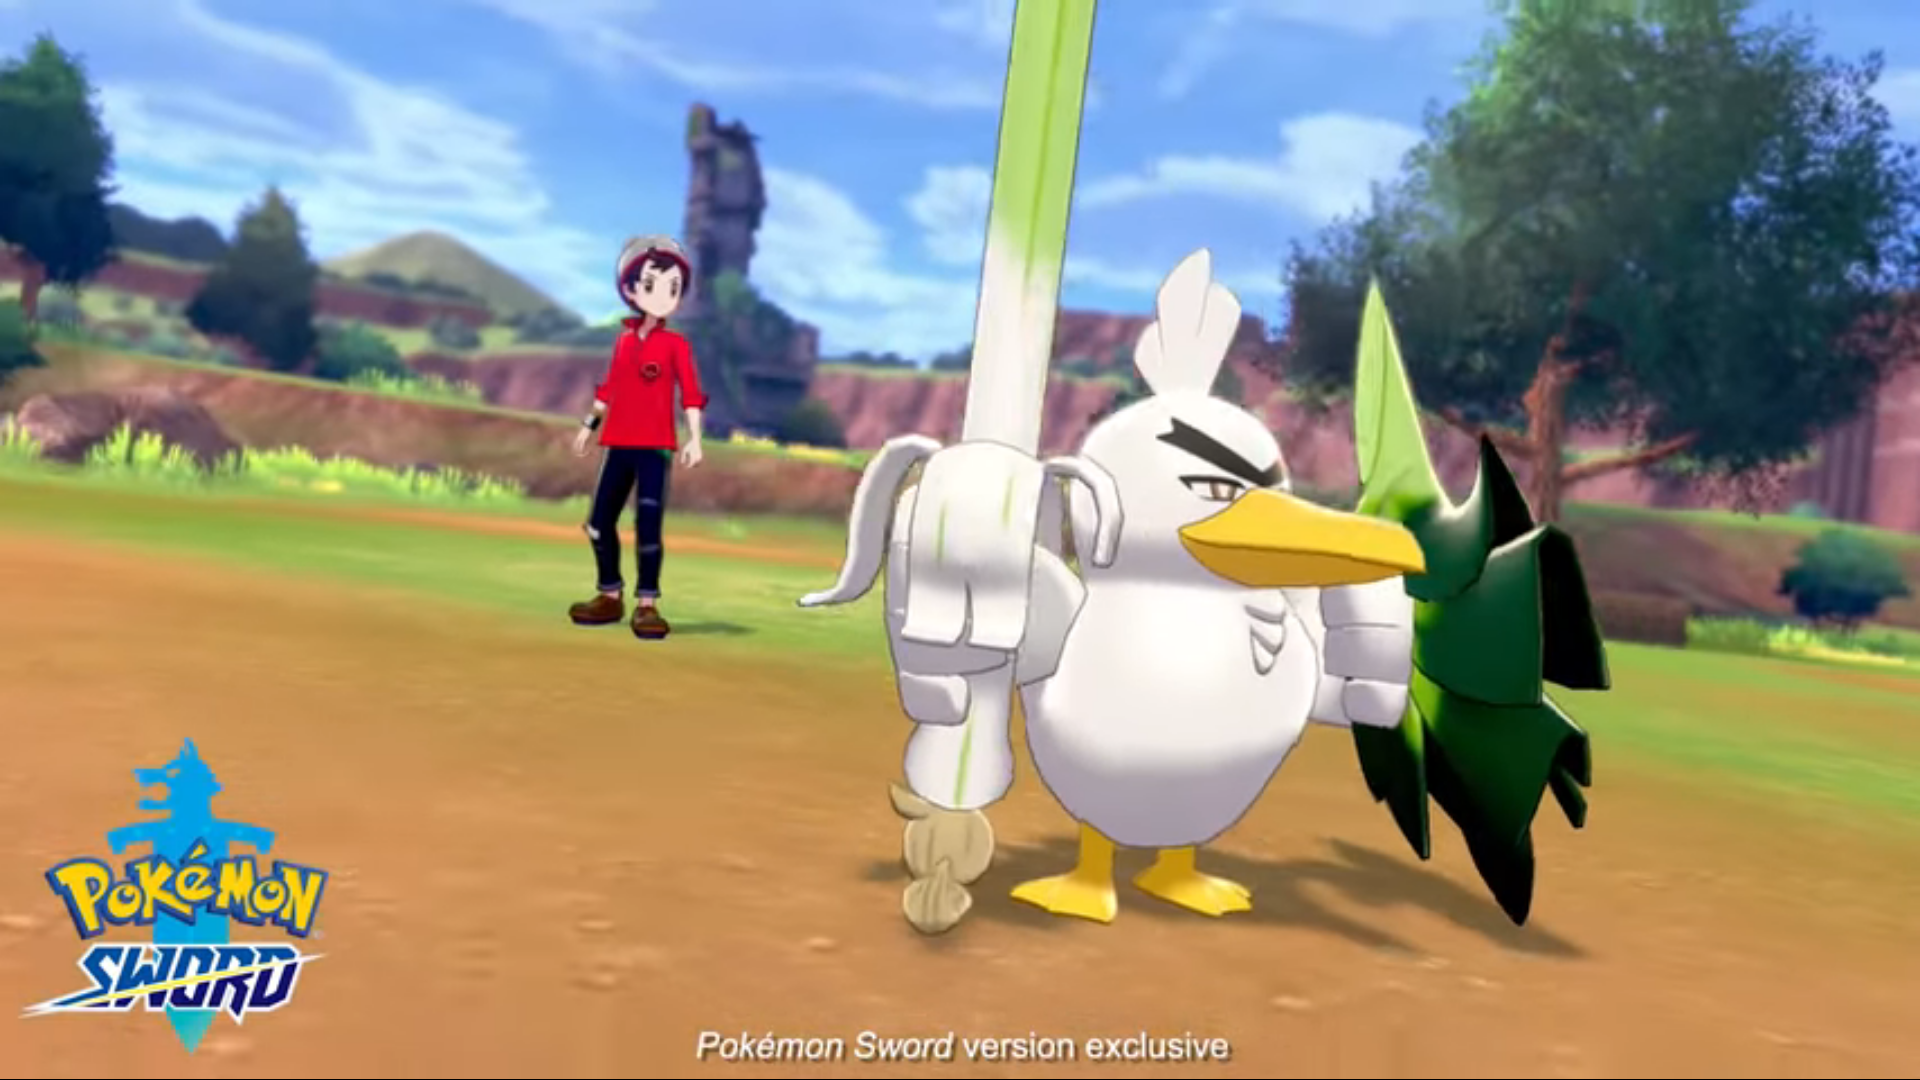 Pokemon Sword and Shield Version Exclusives